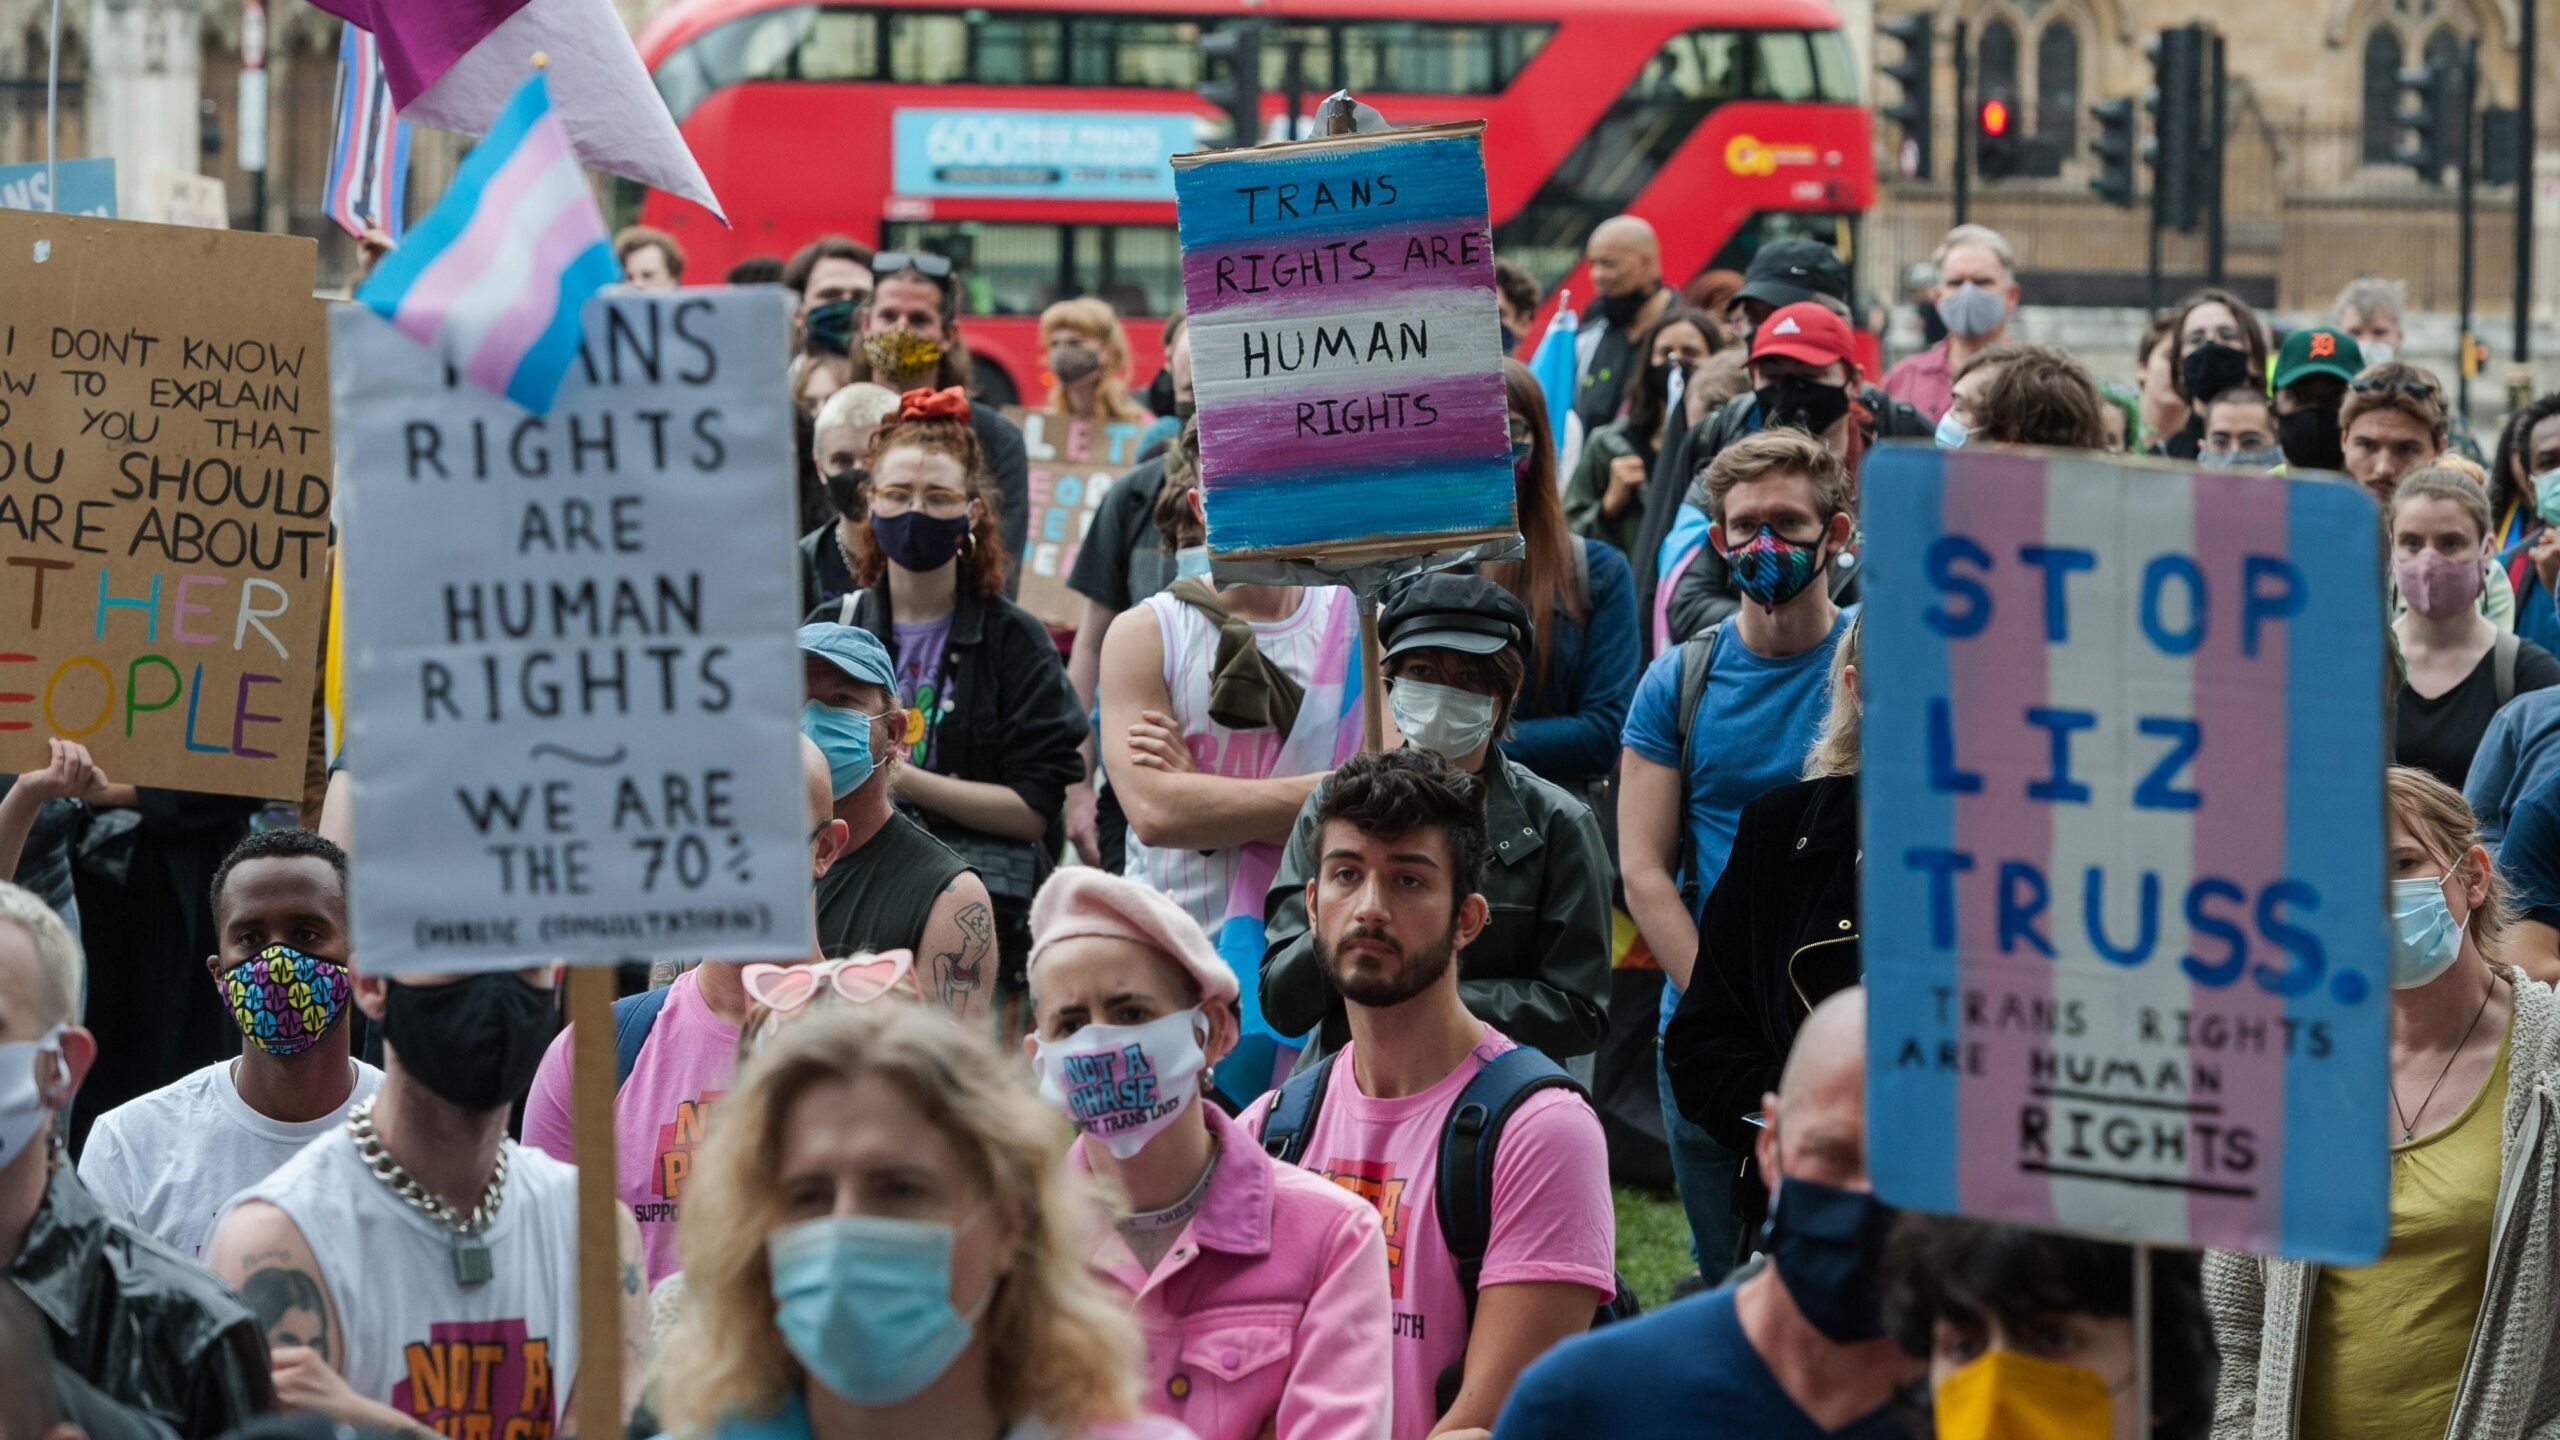 The UK may be waking up on transgender madness (and other stories)